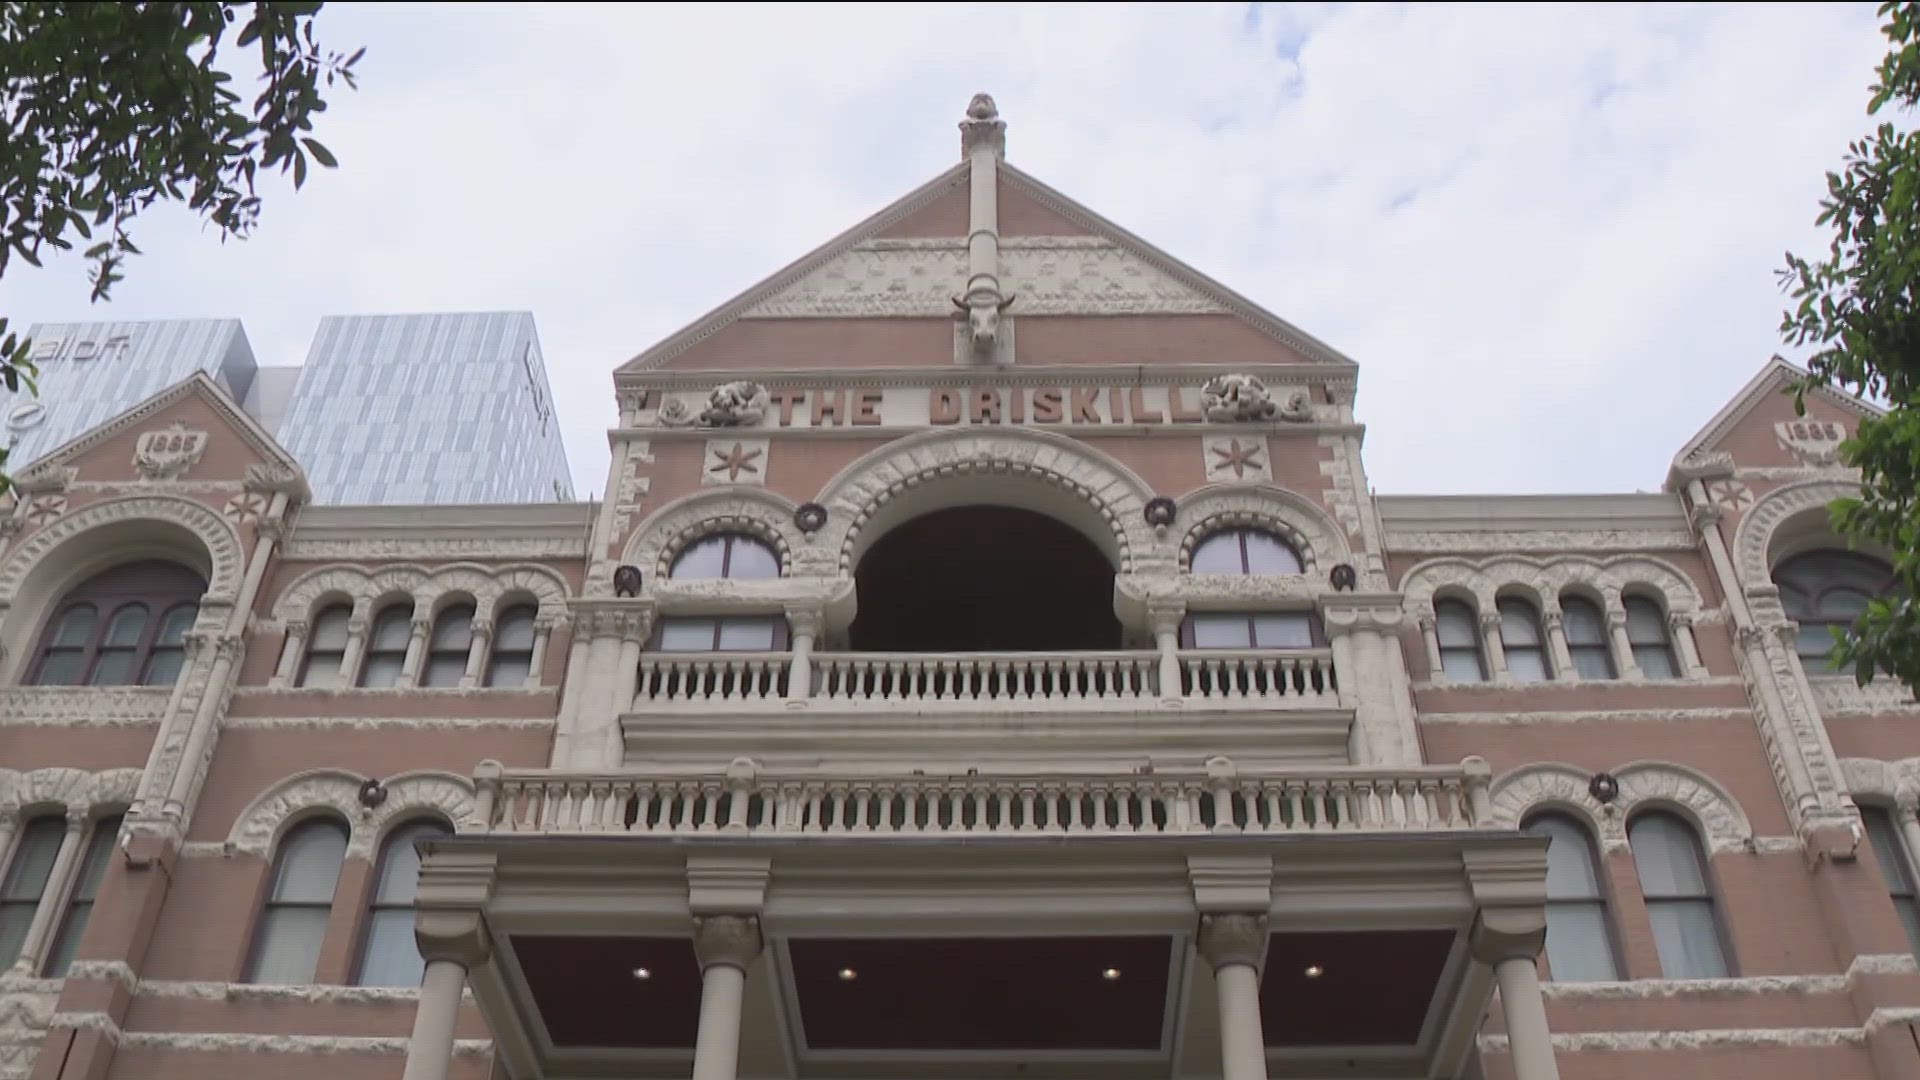 Over its 70 years years, the Driskill Hotel has hosted a menagerie of high-profile clientele, ranging from musicians and actors, to presidents and governors.